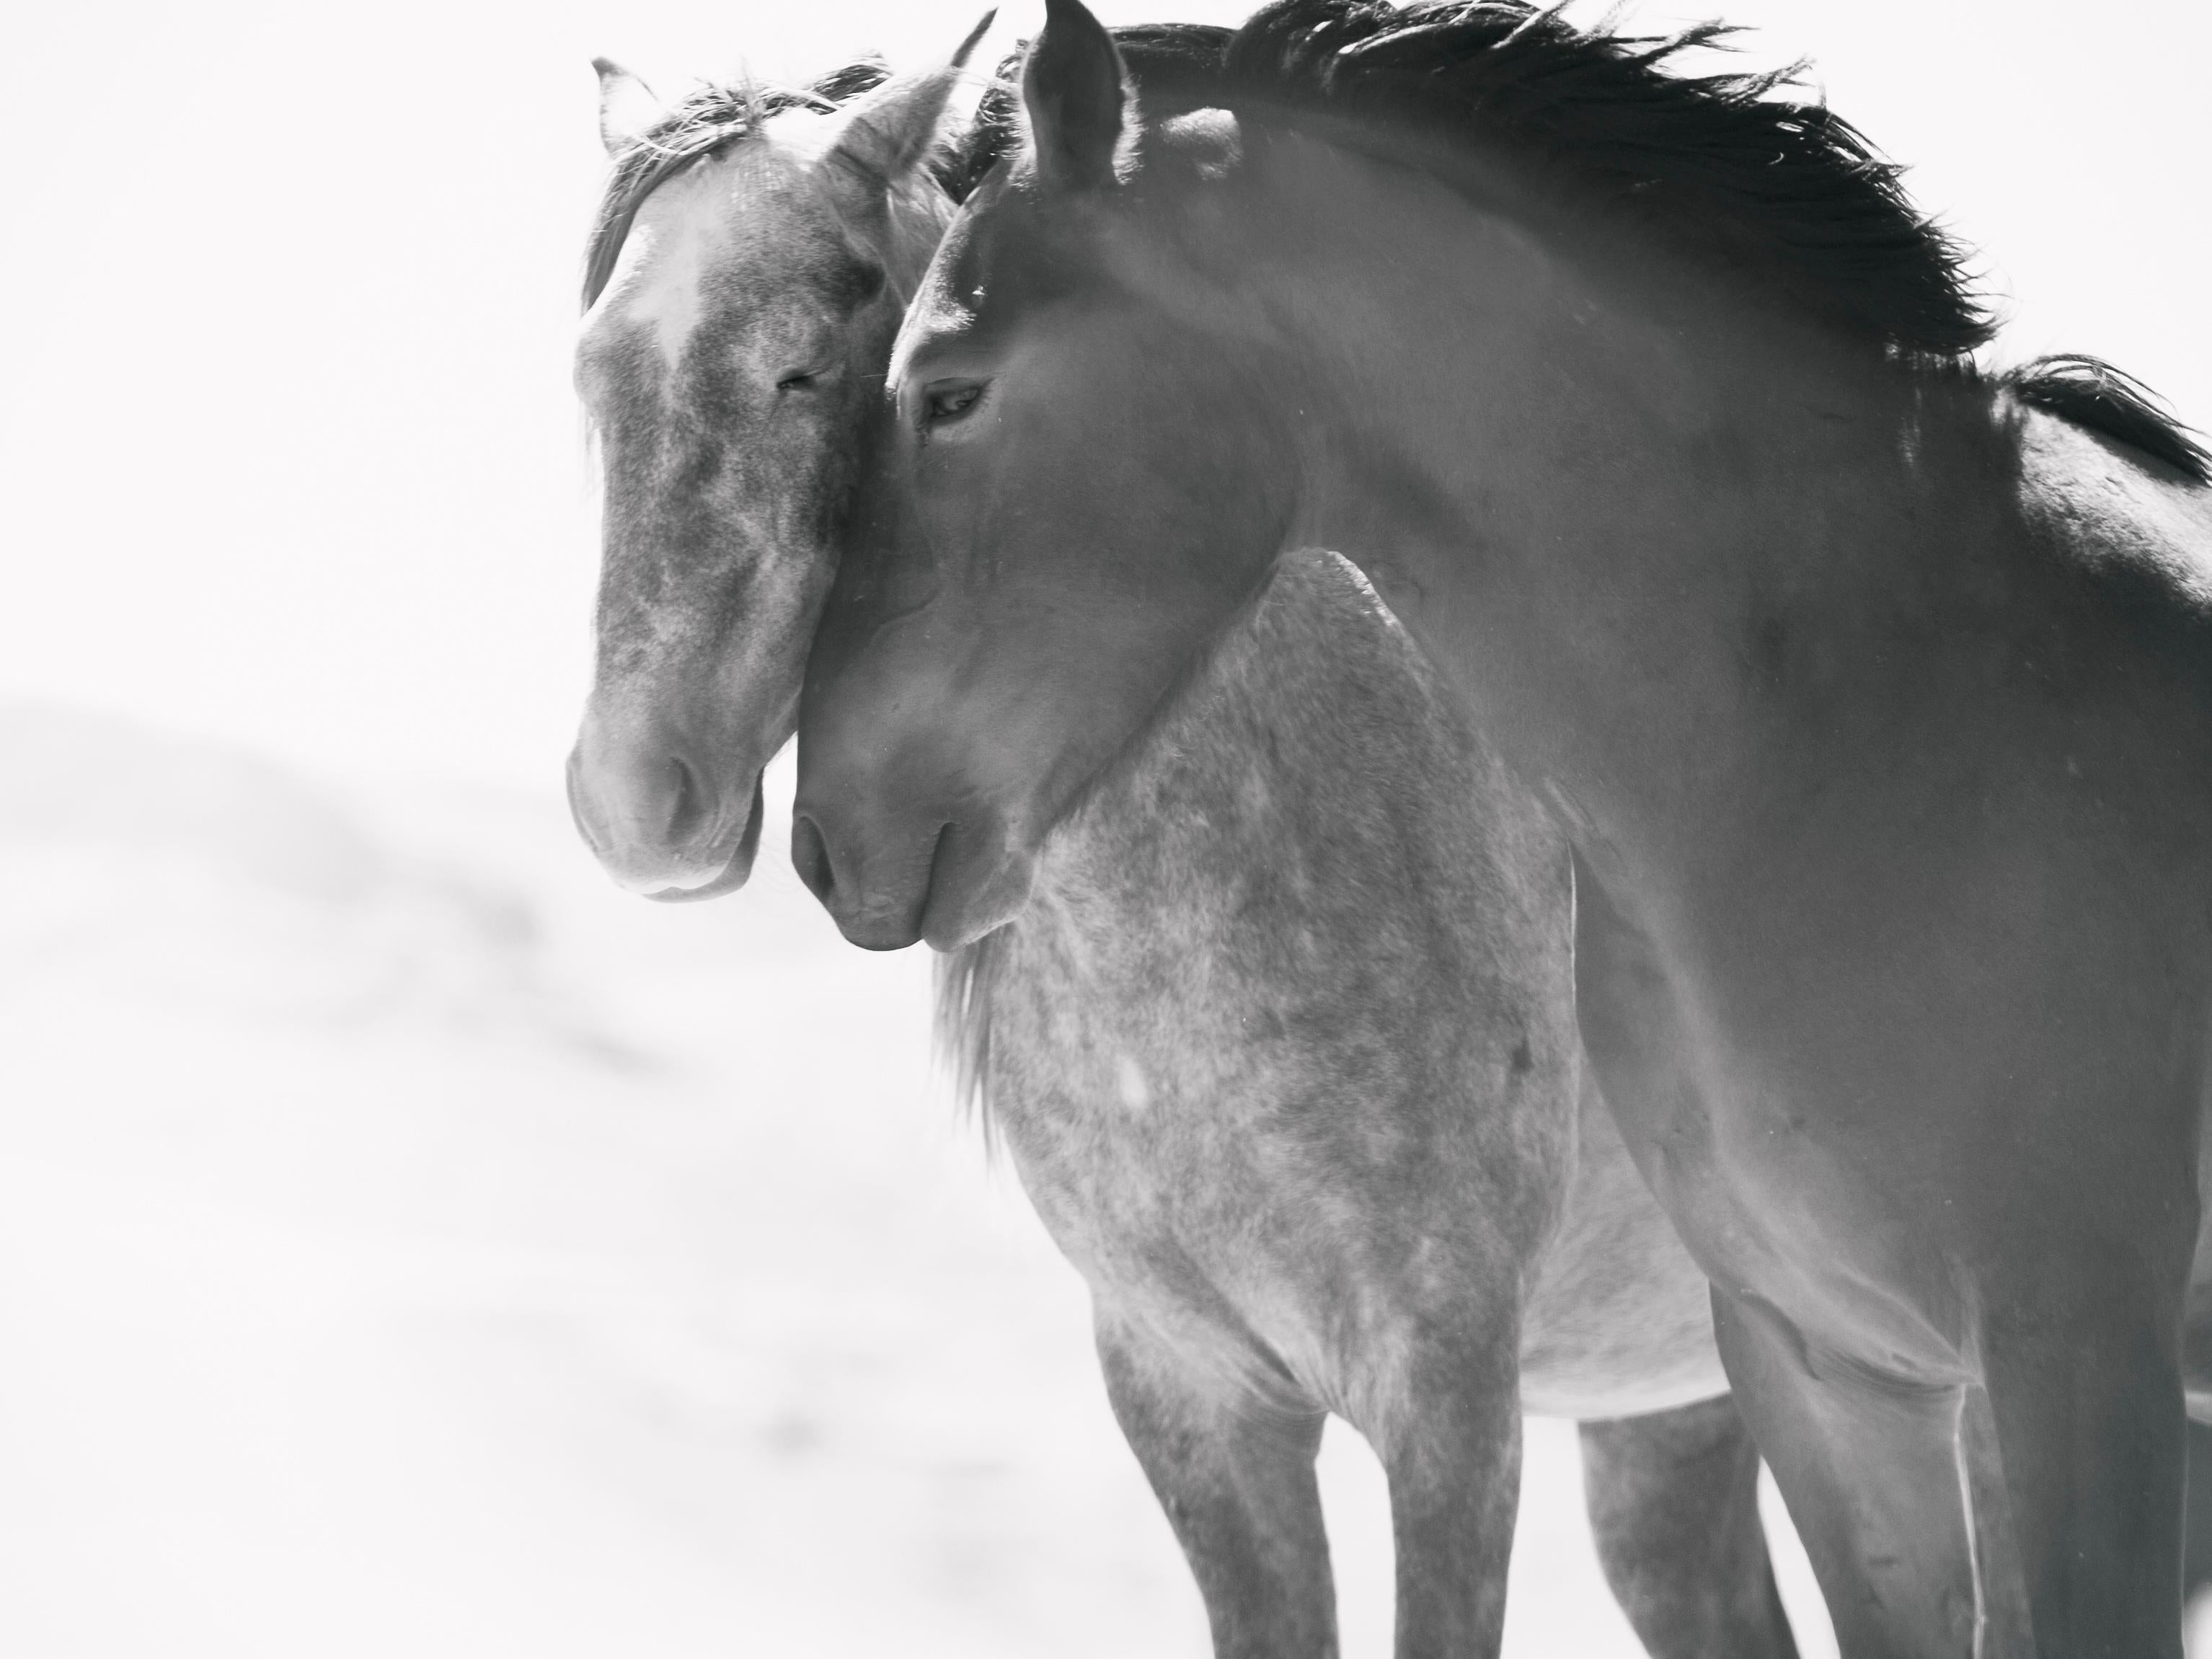  Black and White Photography of Wild Horses Mustangs Photograph 60x90 